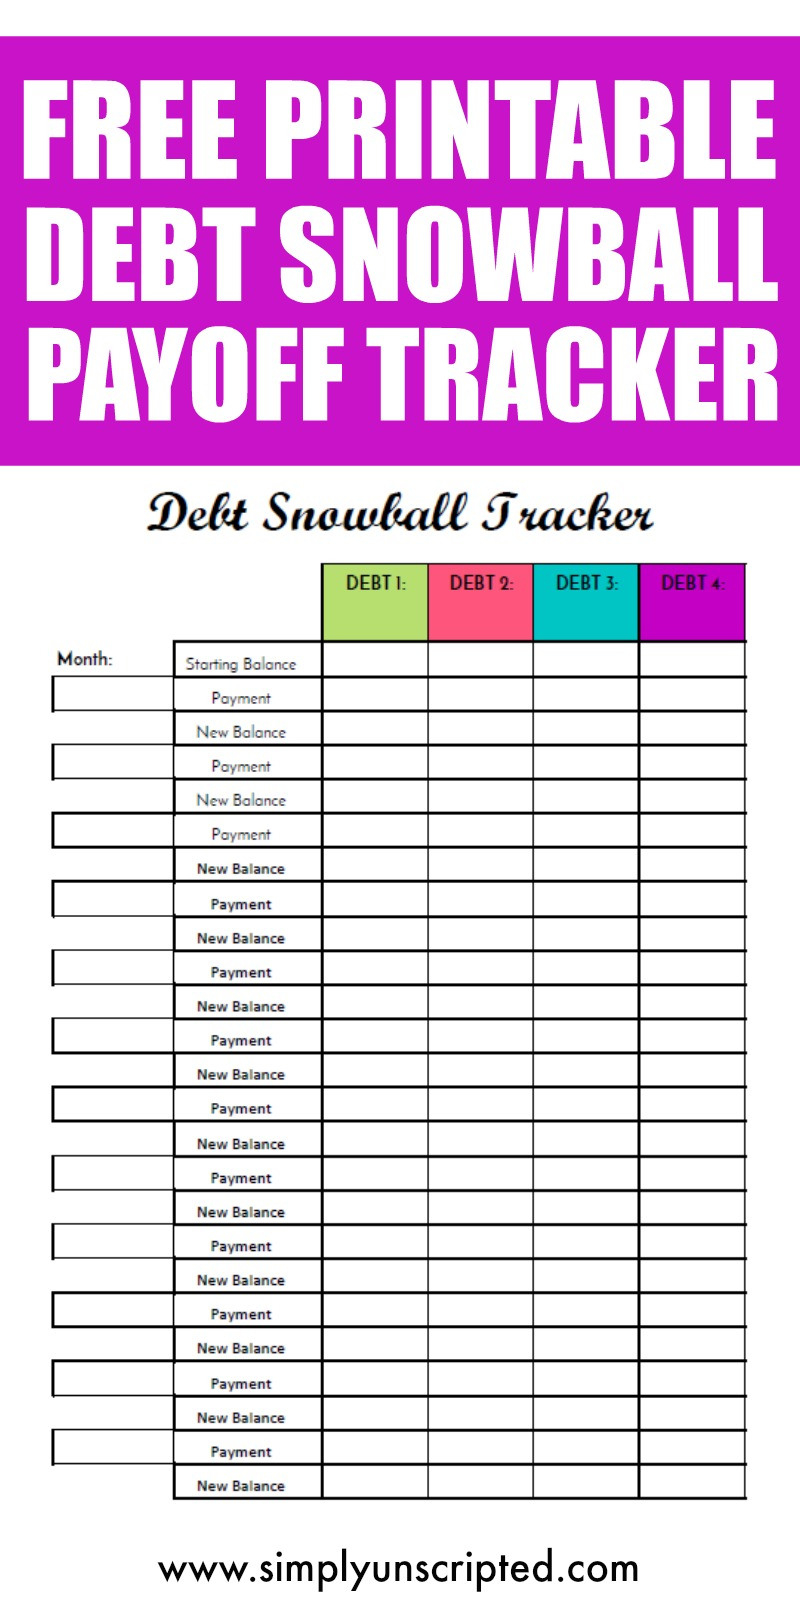 Free Debt Snowball Tracker Printable  Simply Unscripted